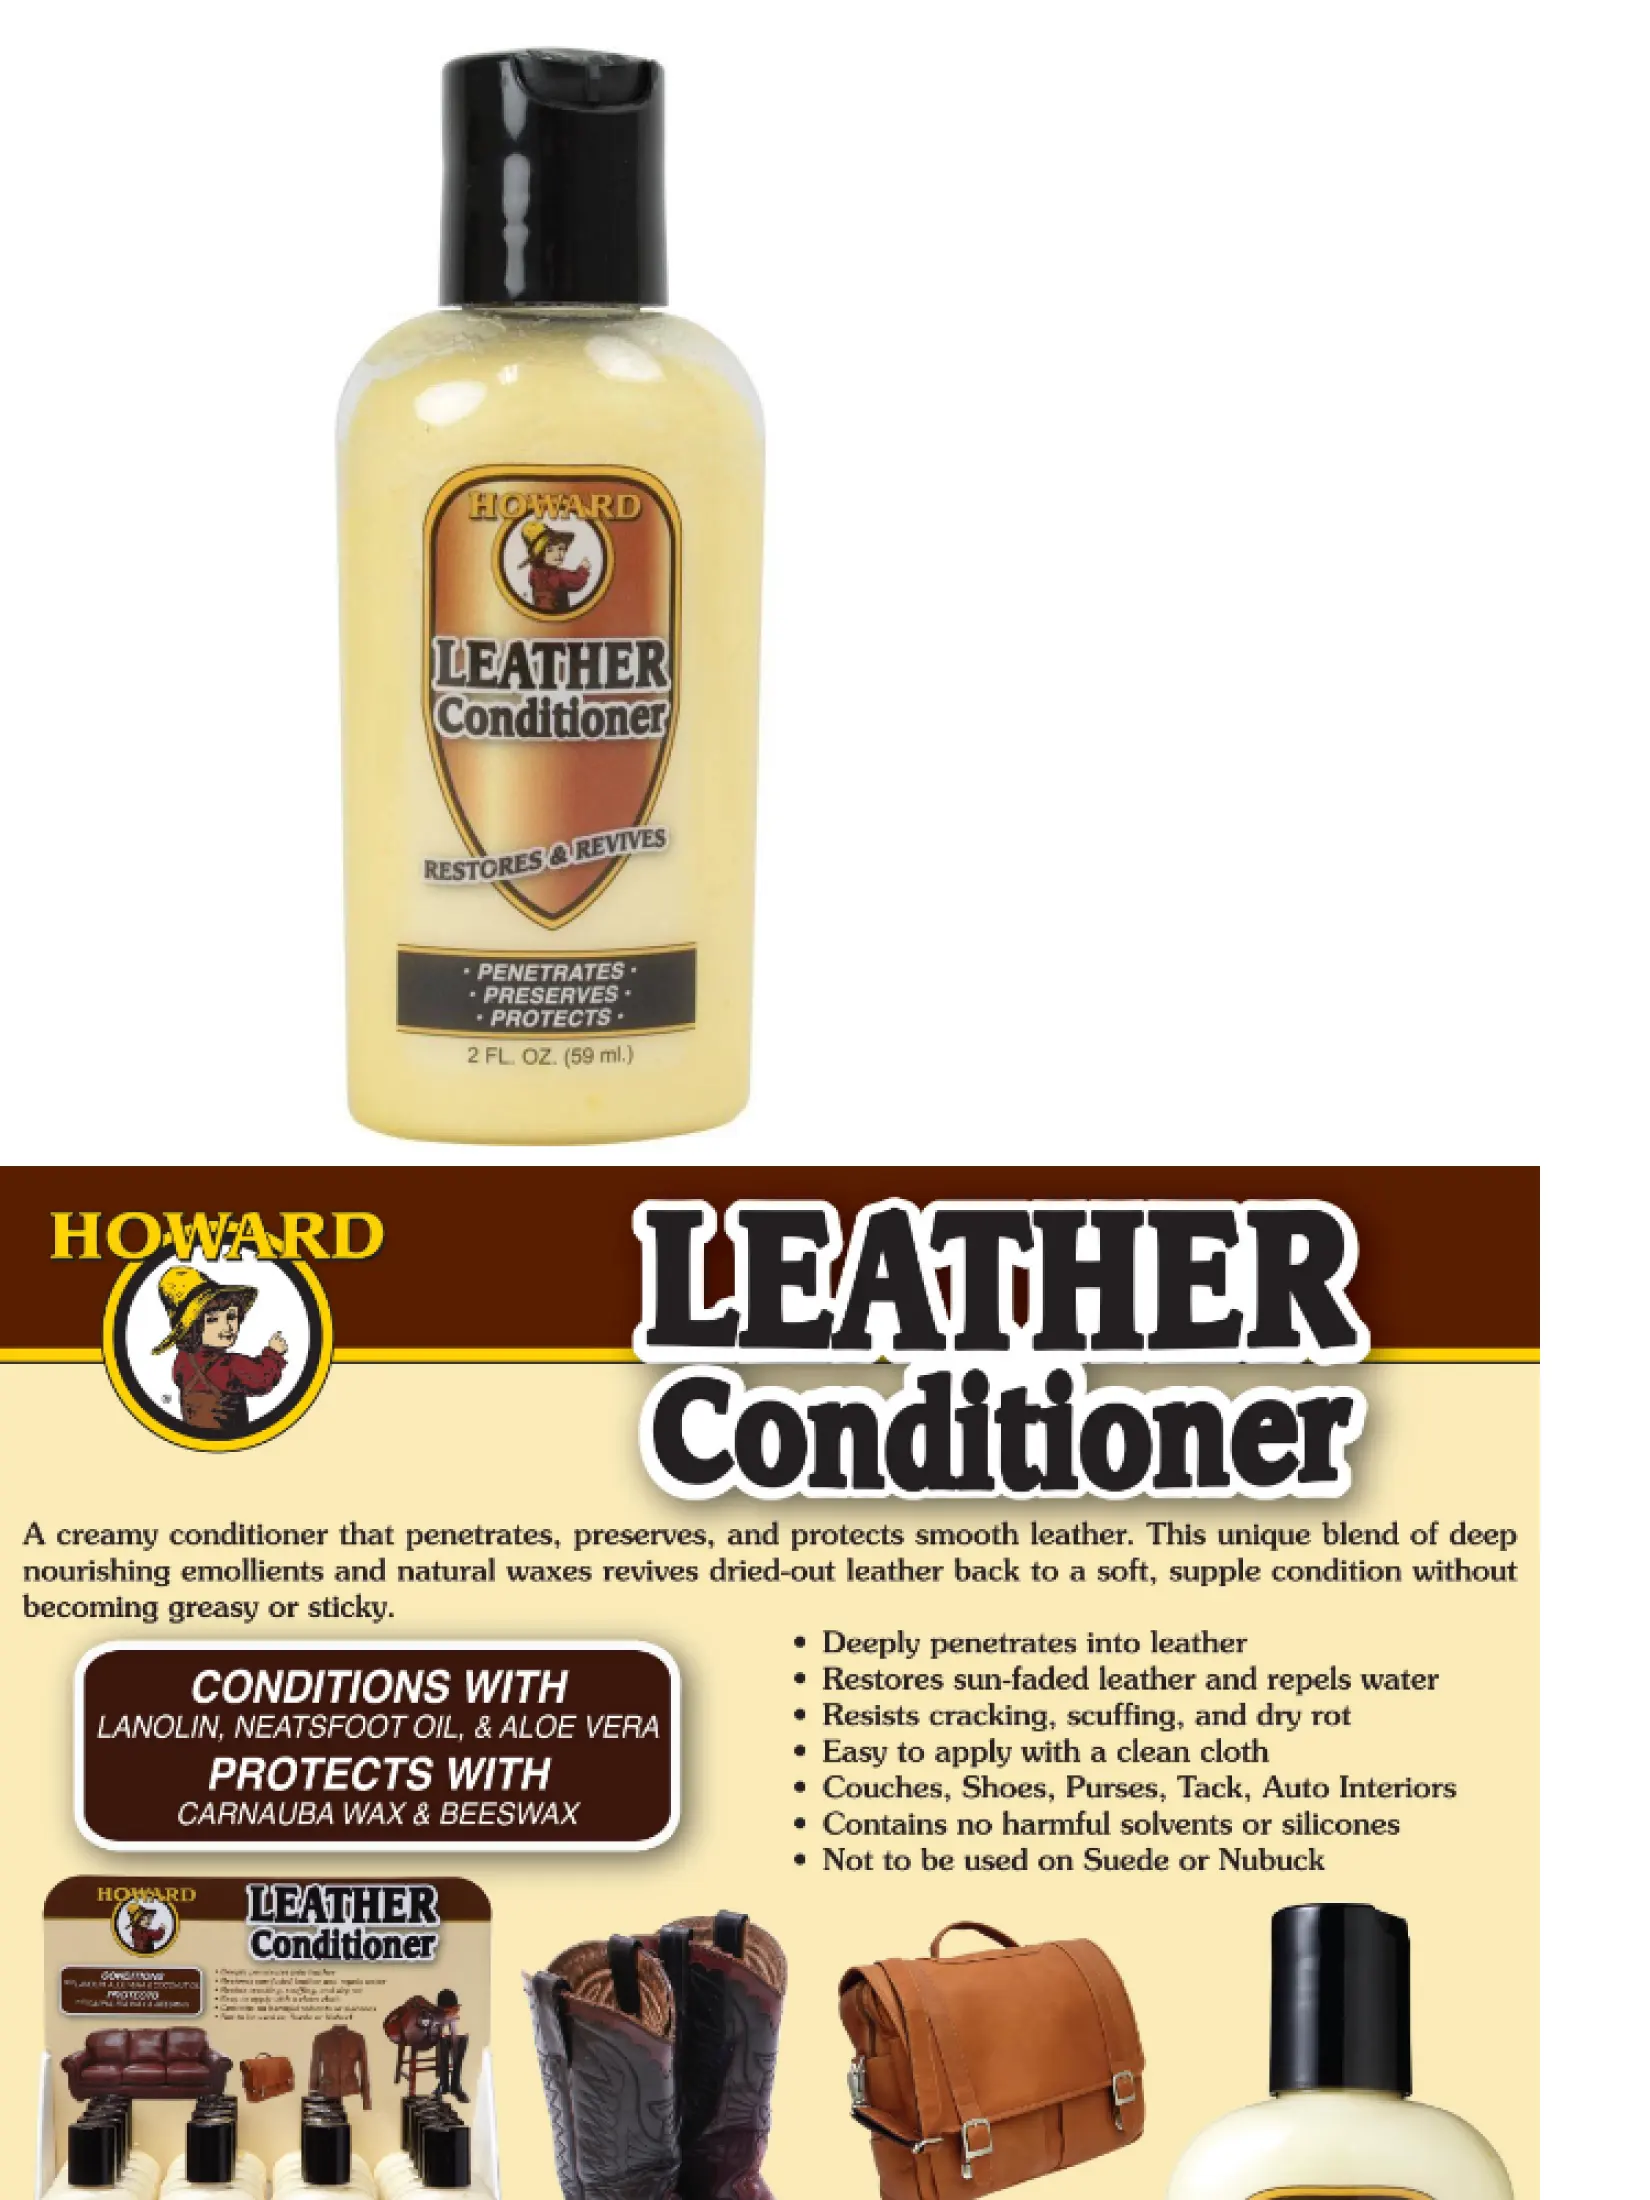 Howard Leather Conditioner 2oz, Howard Leather Conditioner